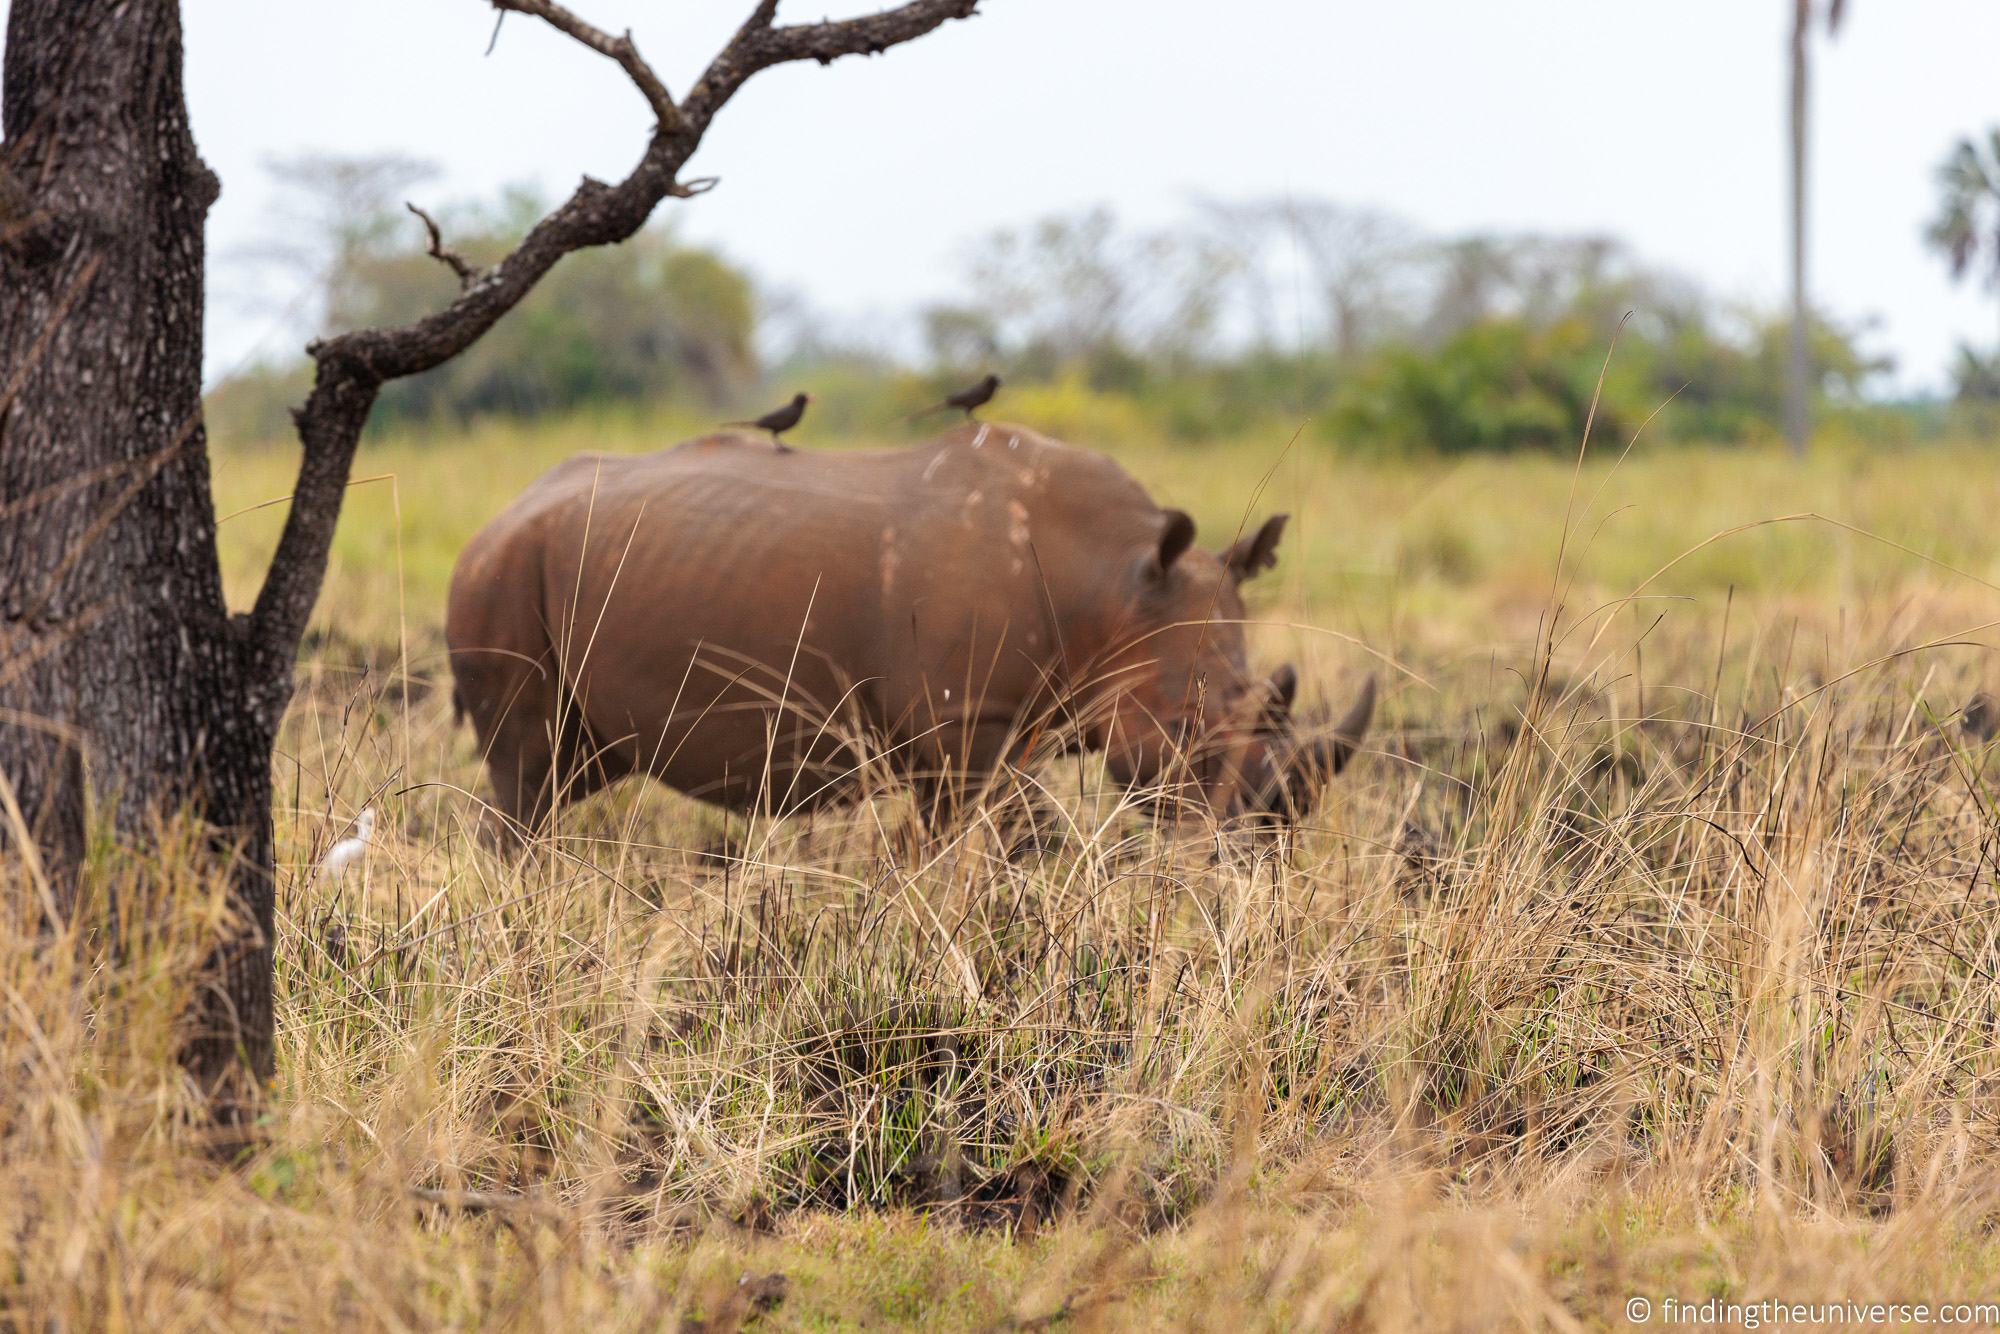 Out of focus rhino